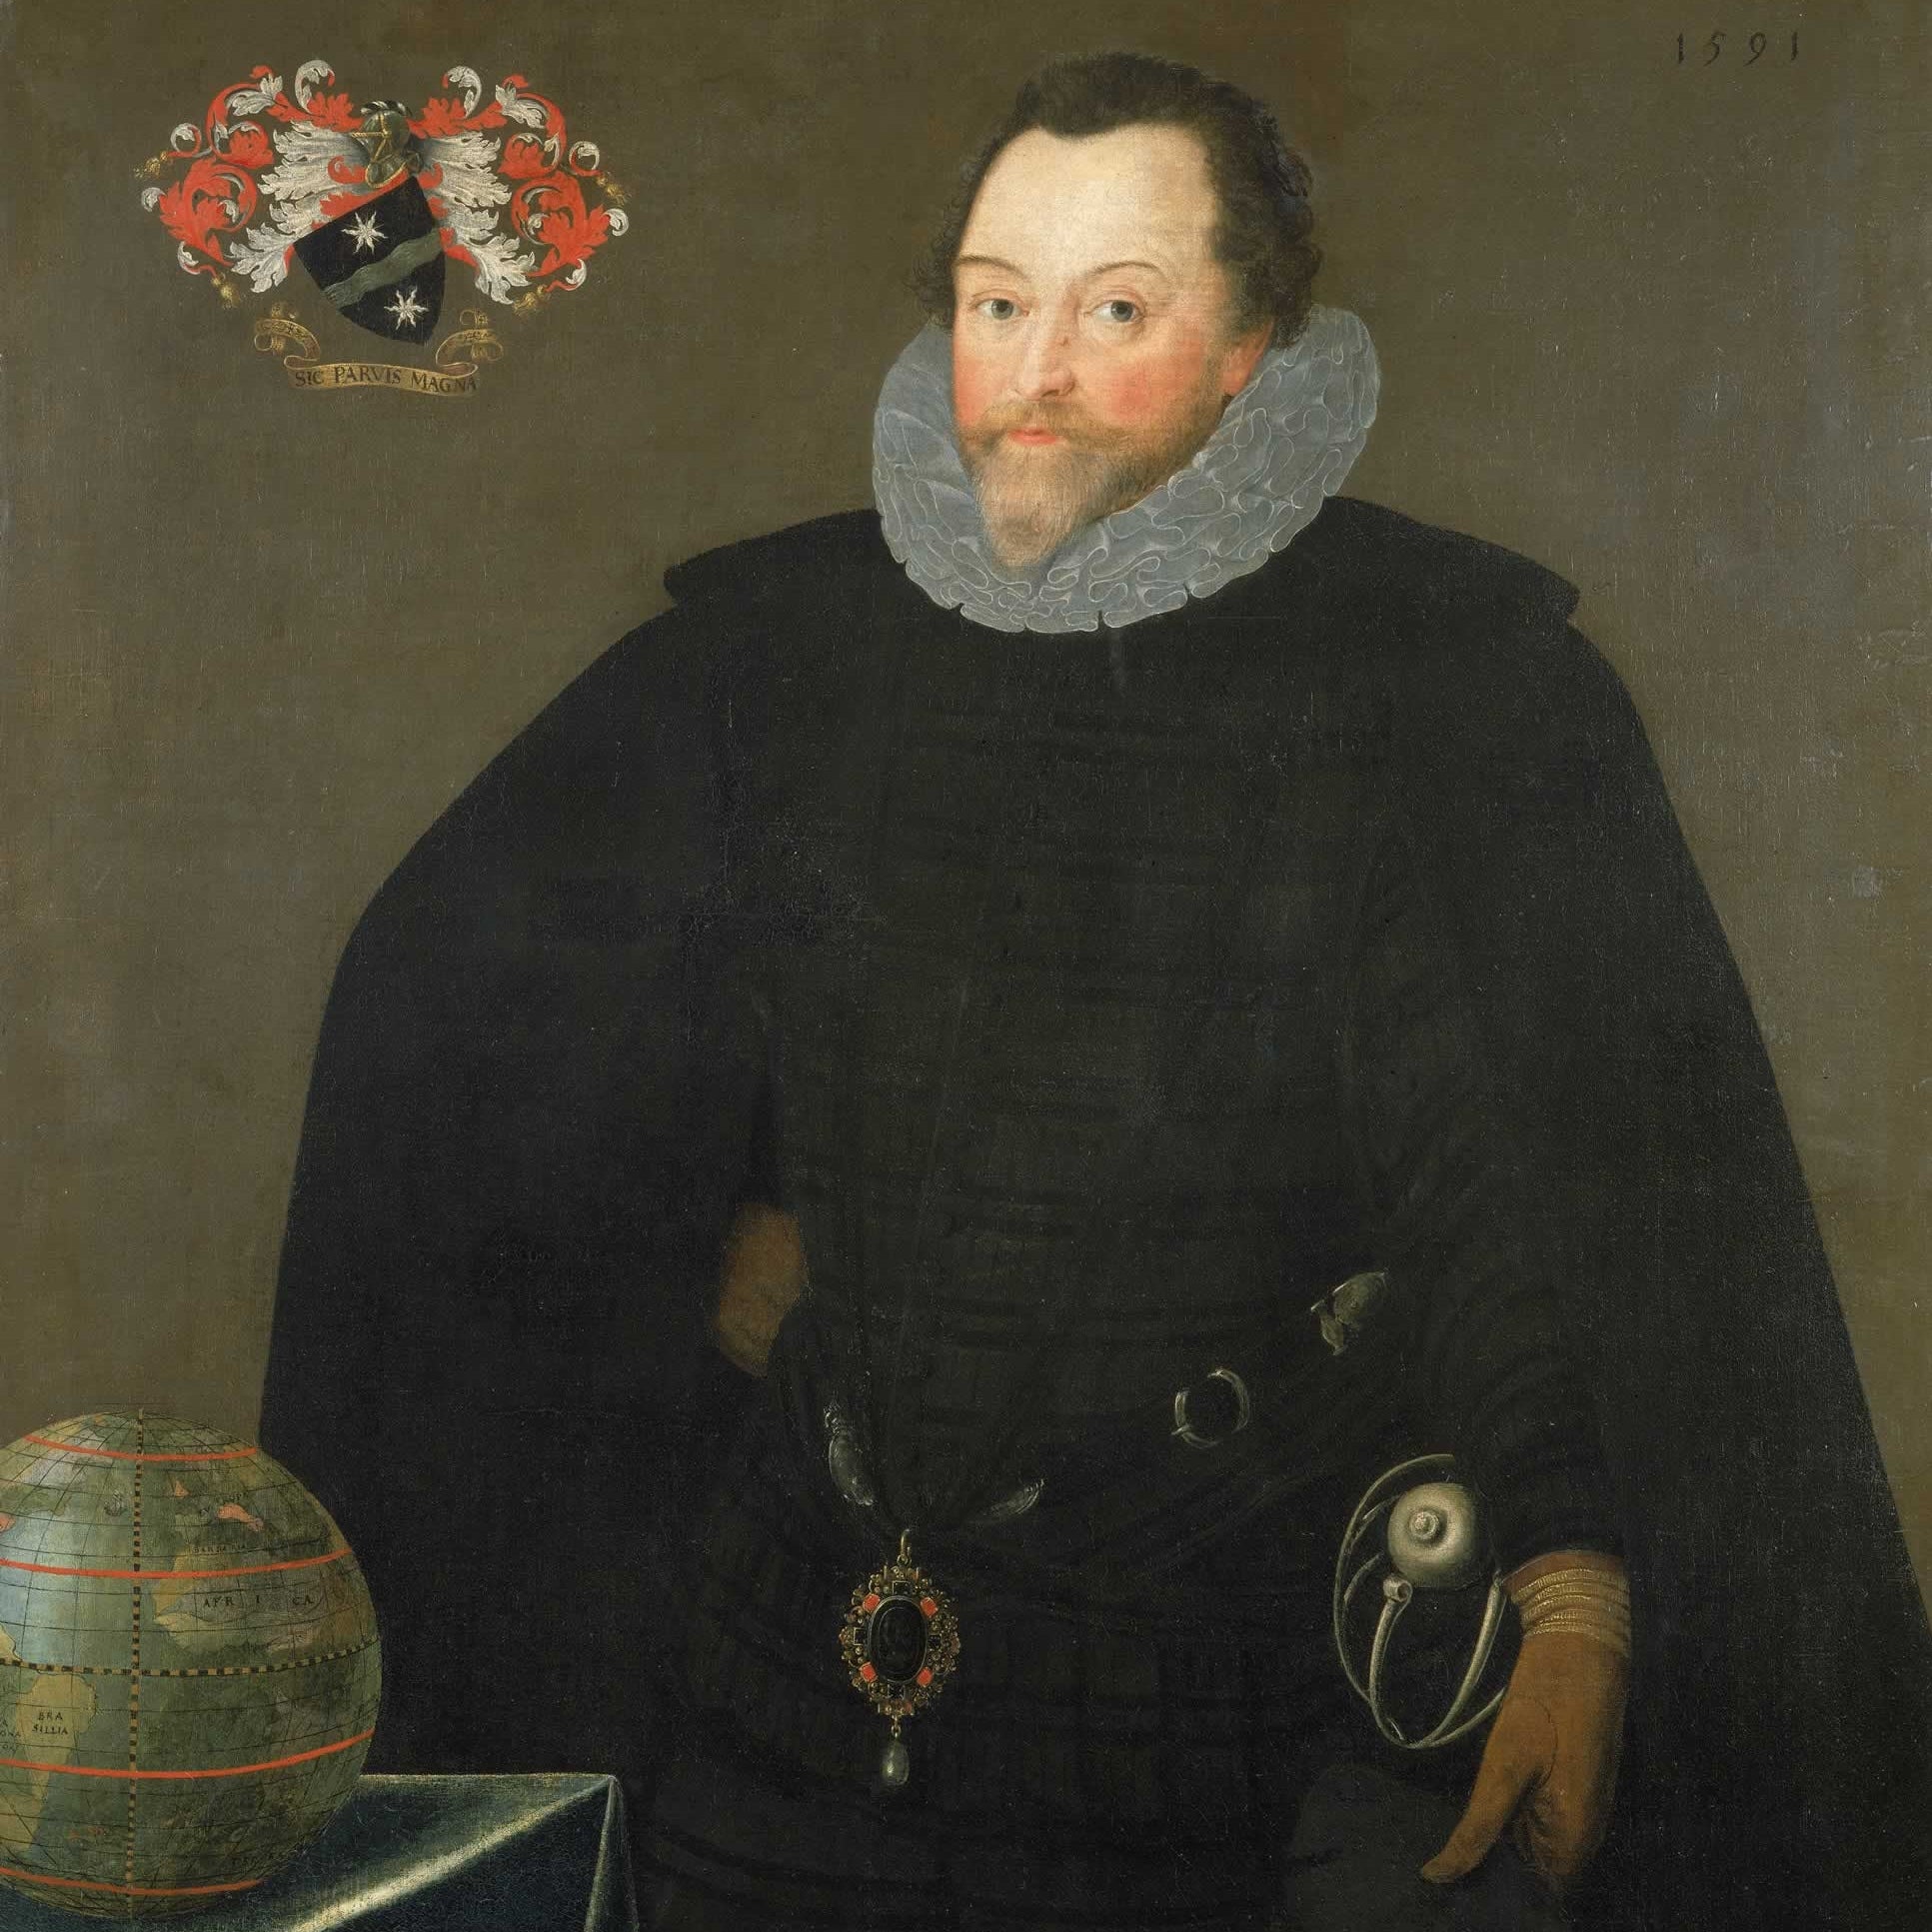 A portrait from 1591 of Sir Francis Drake stood next to a globe